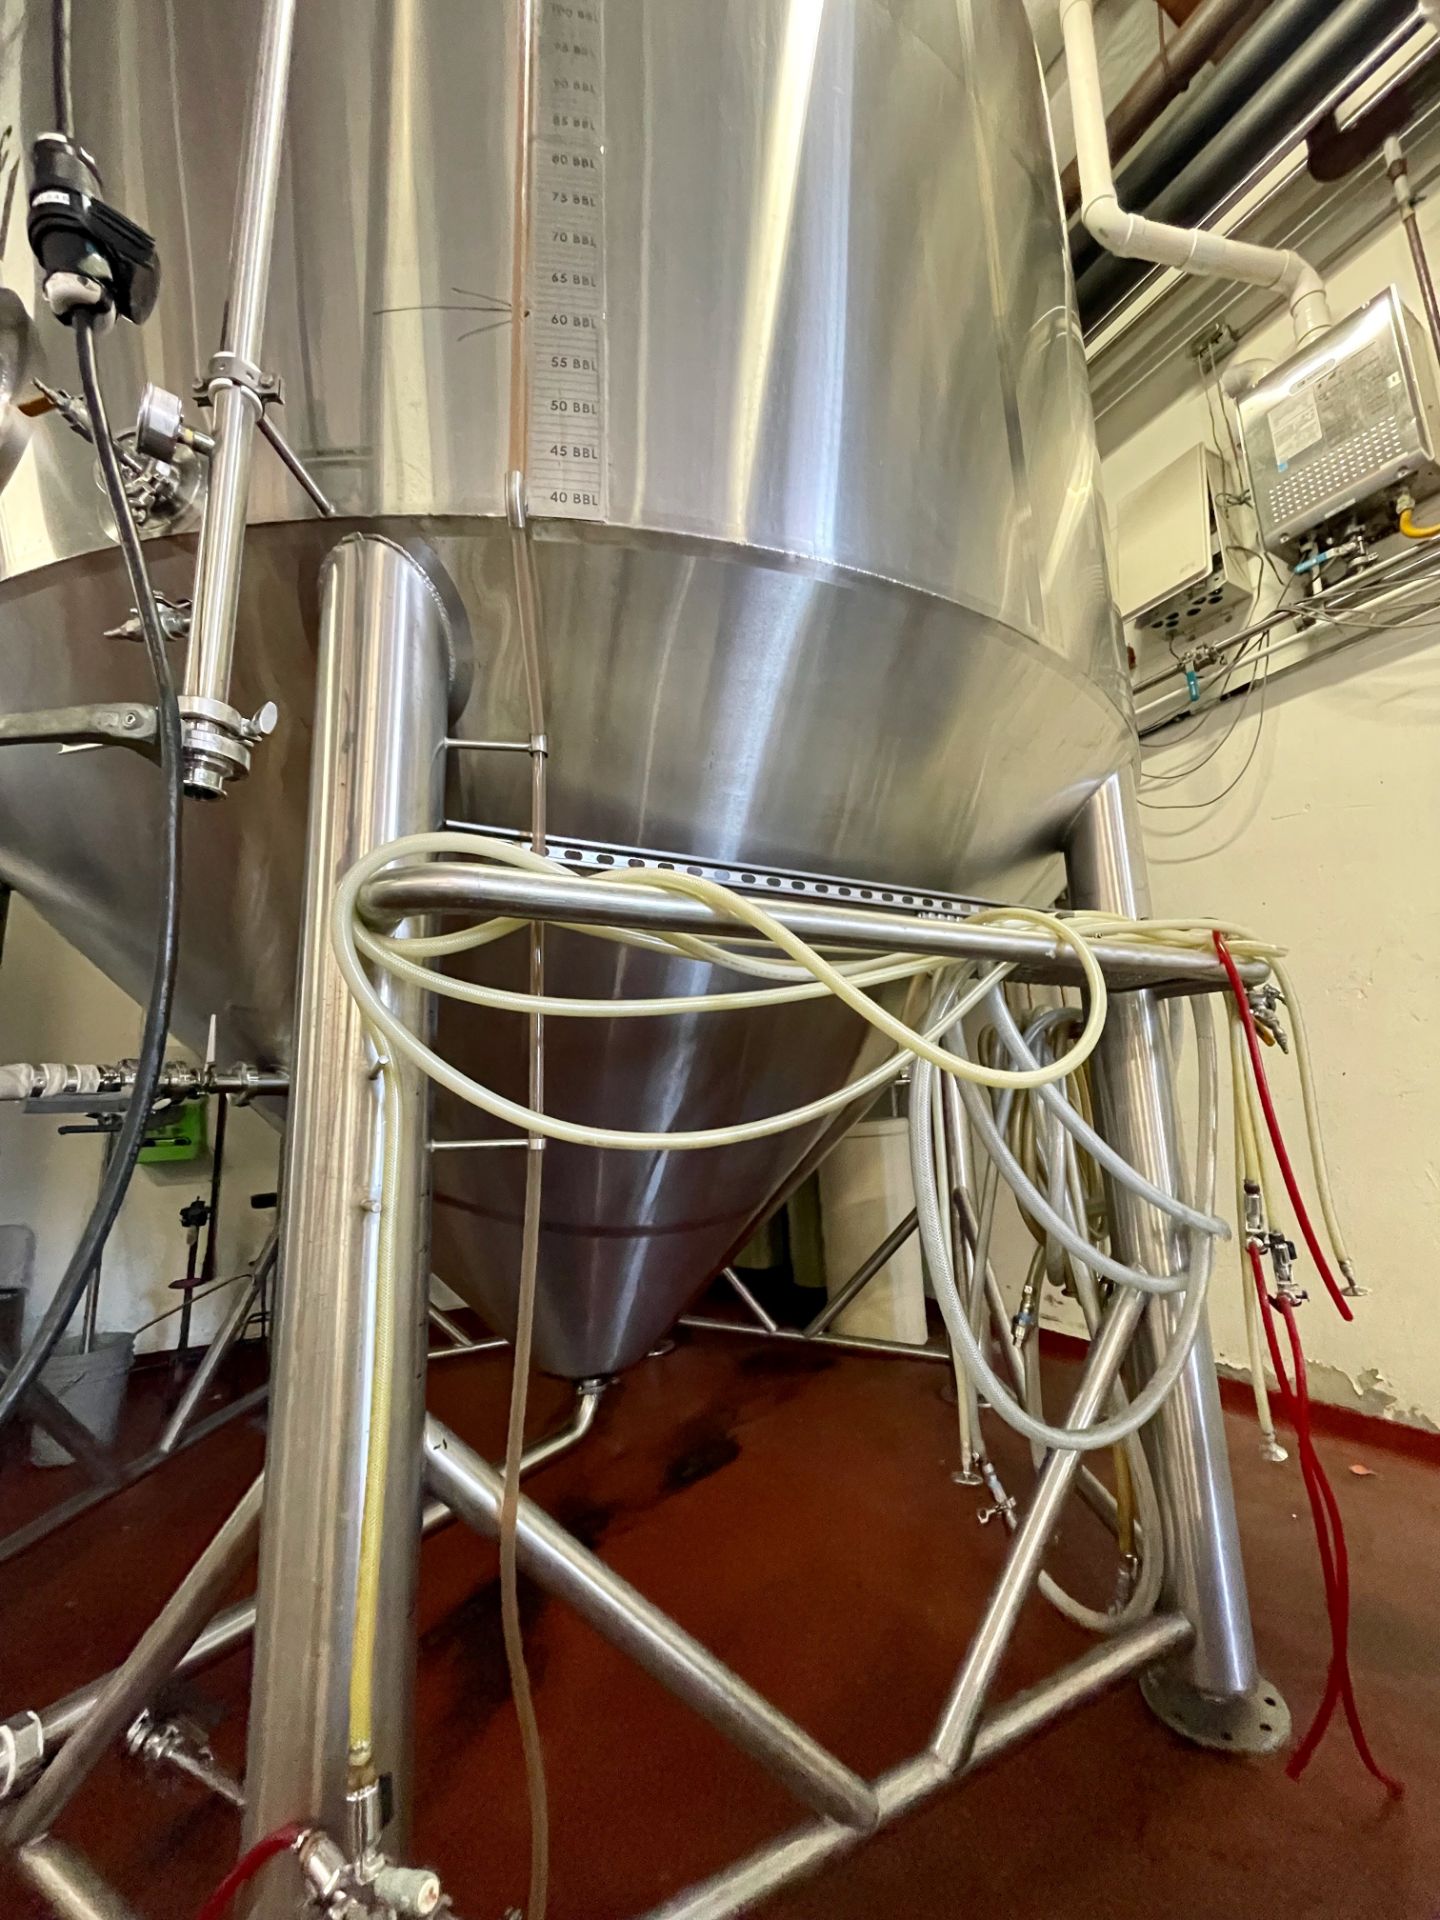 2016 Metalcraft 170 BBL Fermenter, Glycol Jacketed, Steep Cone Bottom, D | Rig Fee: $6350 w/ Saddles - Image 5 of 8